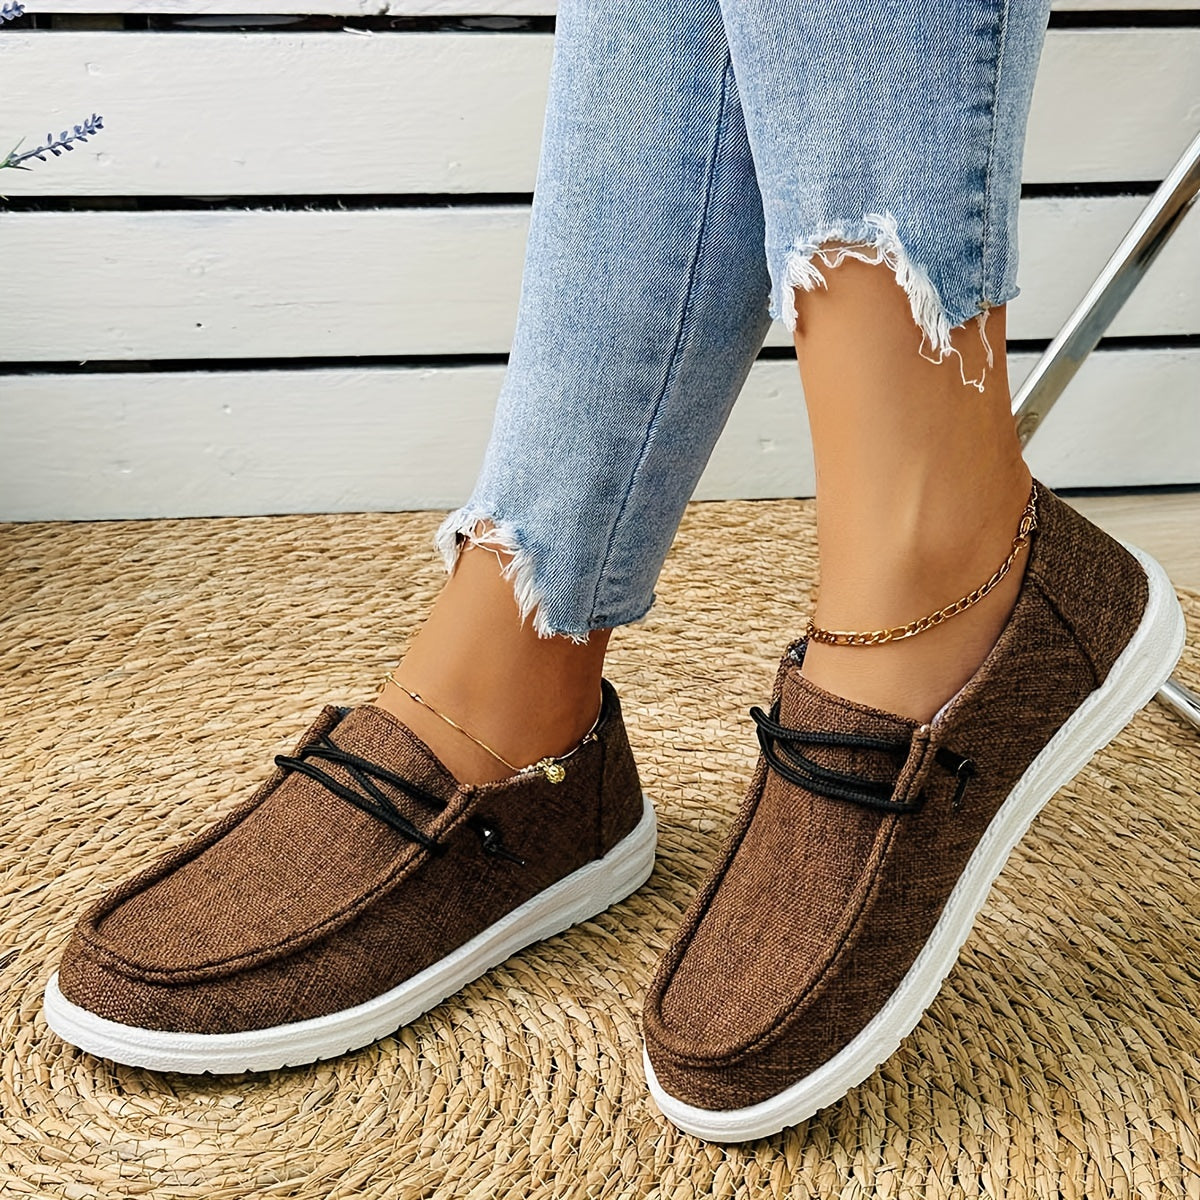 Women's Solid Color Canvas Shoes, Casual Lace Up Loafer Shoes, Lightweight Low Top Sneakers